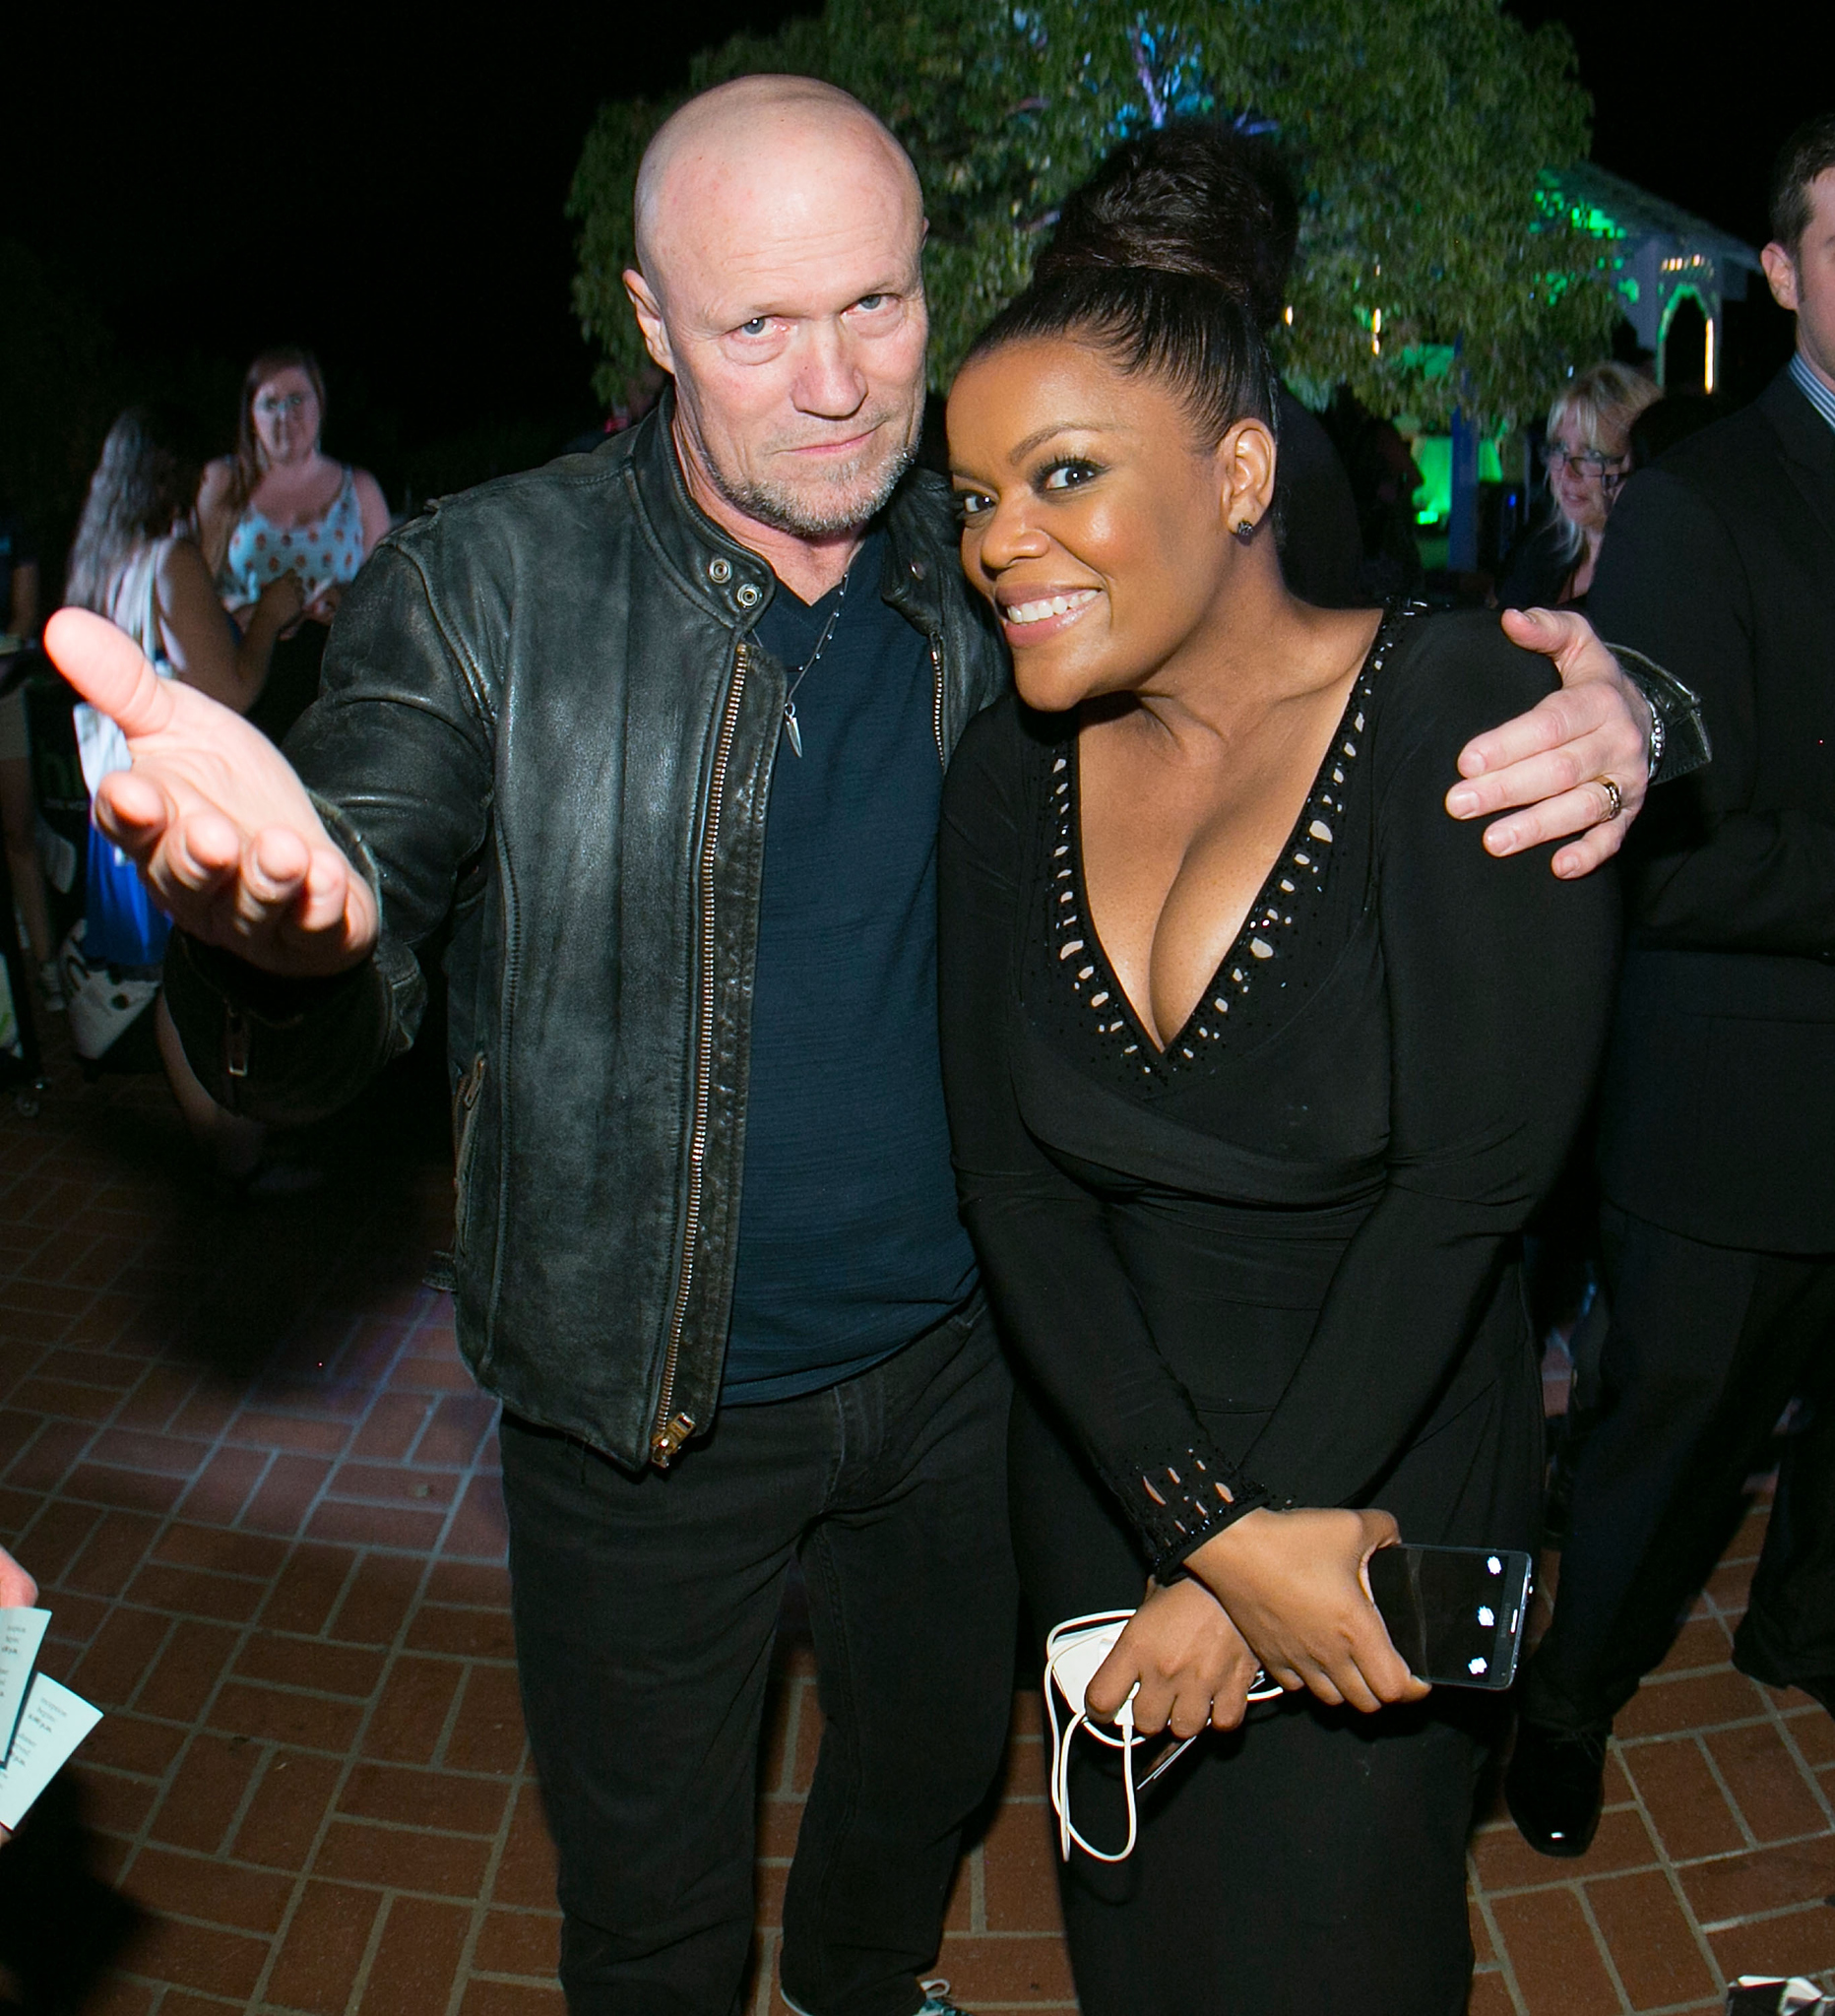 Nicole Brown, Michael Rooker and Yvette Nicole Brown